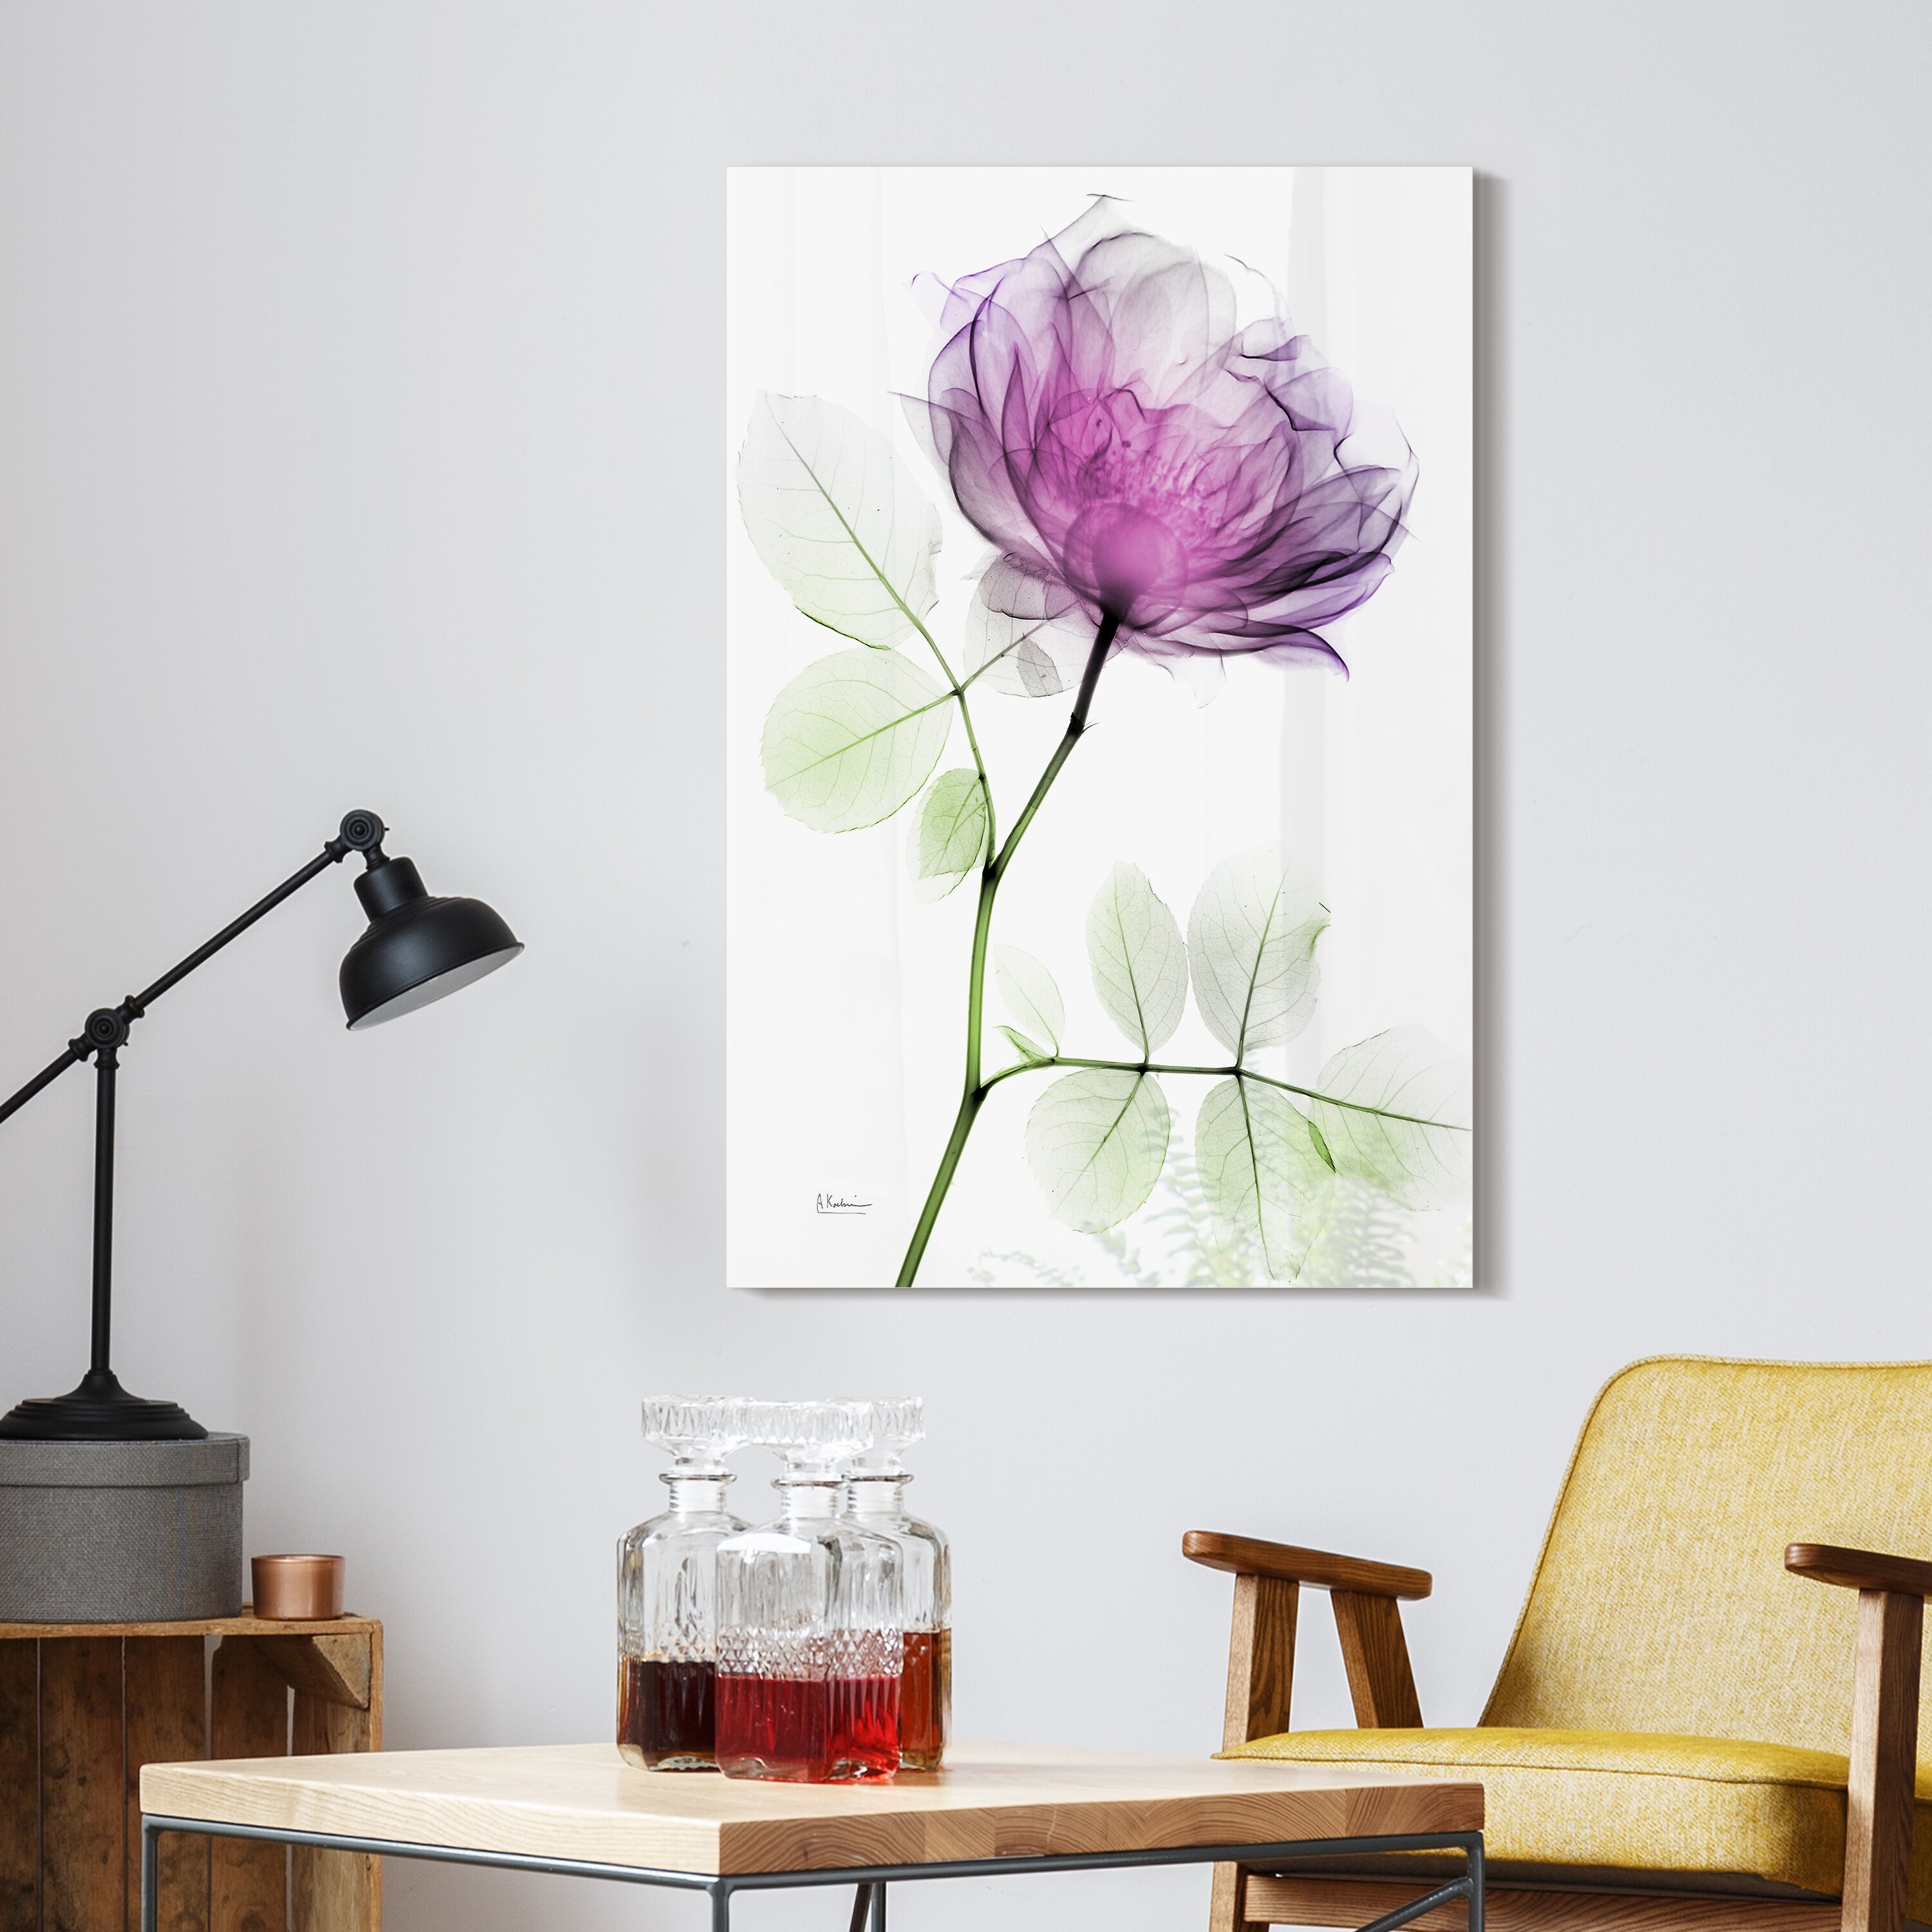 Empire Art Direct 48-in H x 32-in W Floral Glass Print